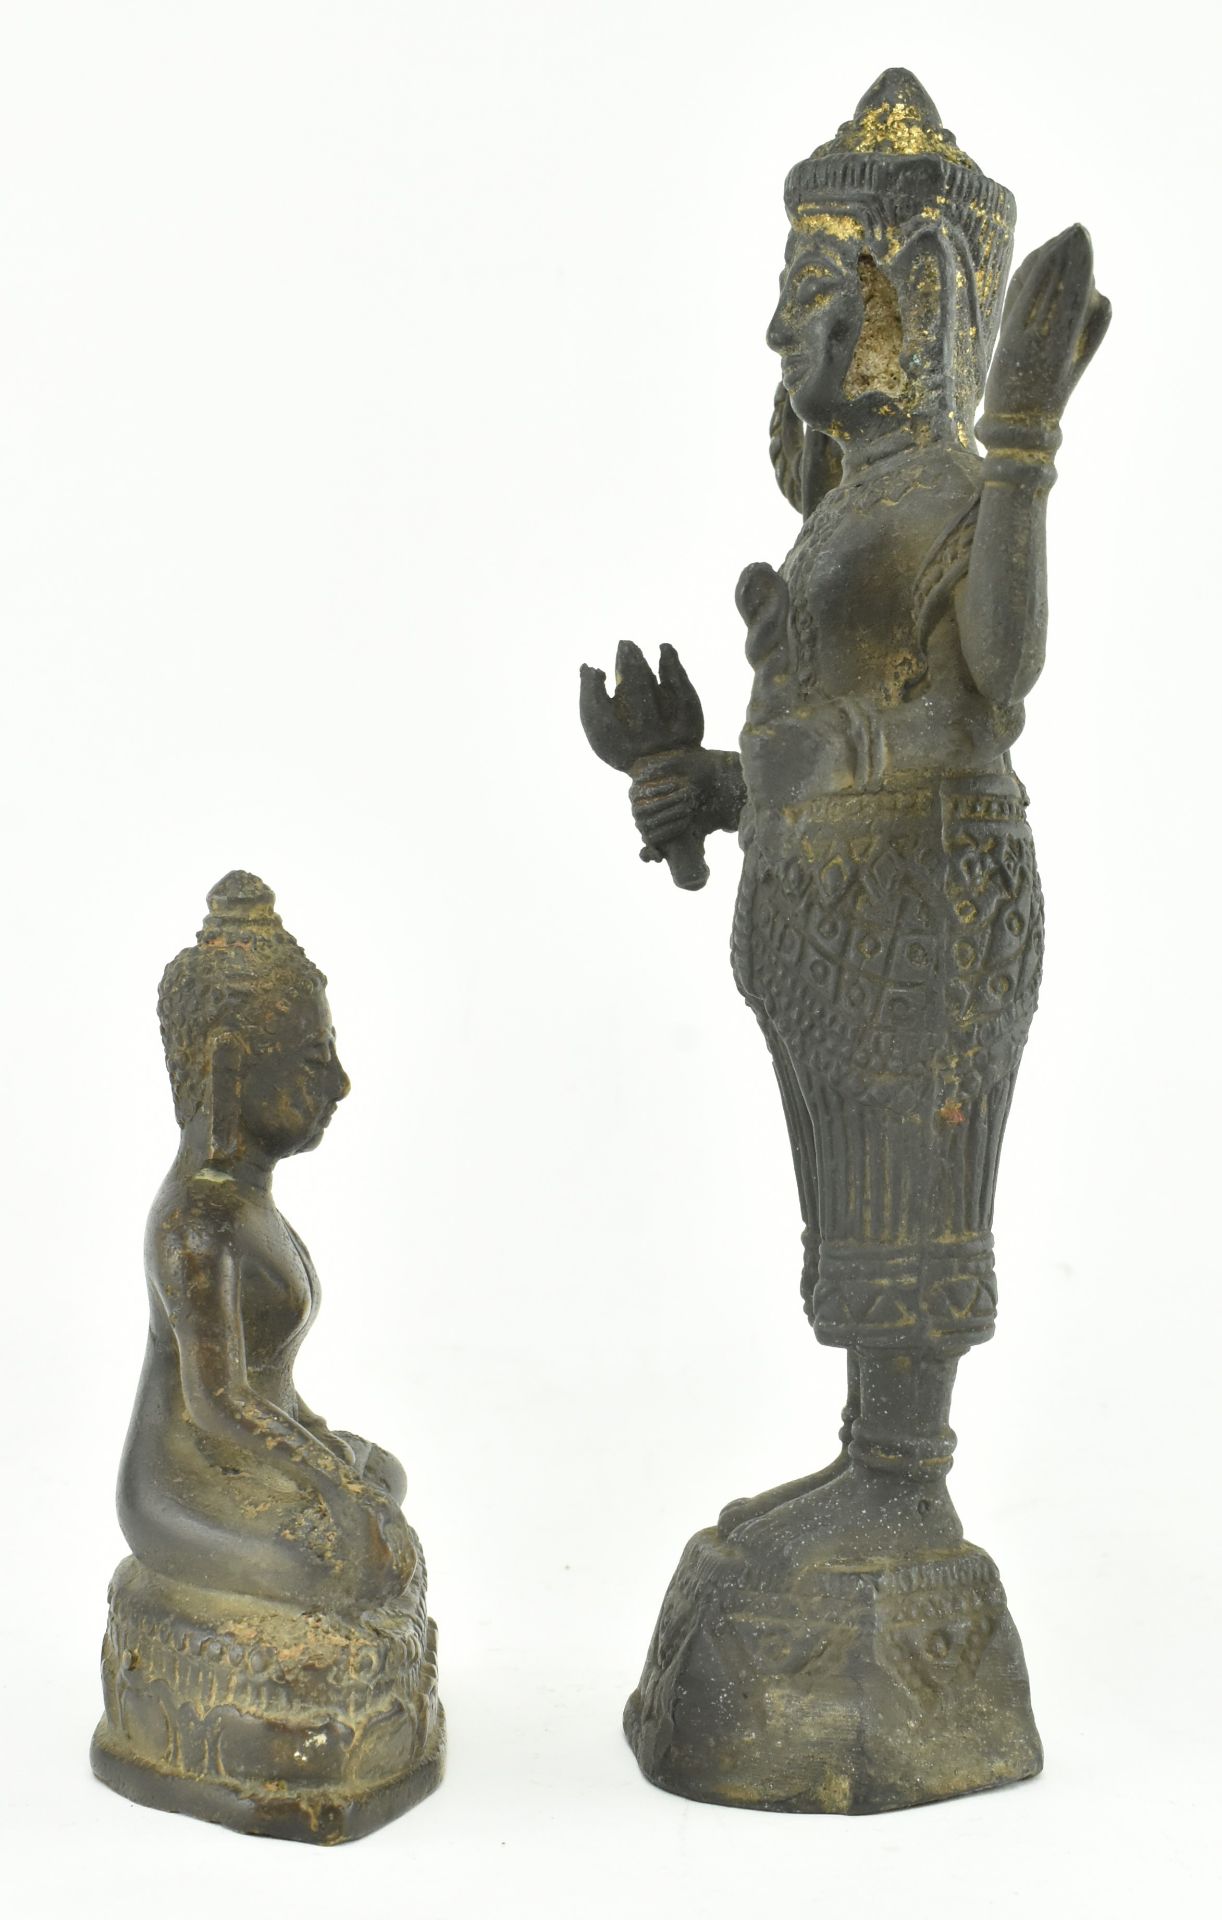 TWO 20TH CENTURY SOUTH EAST ASIAN BRONZE RELIGIOUS FIGURINES - Image 4 of 5